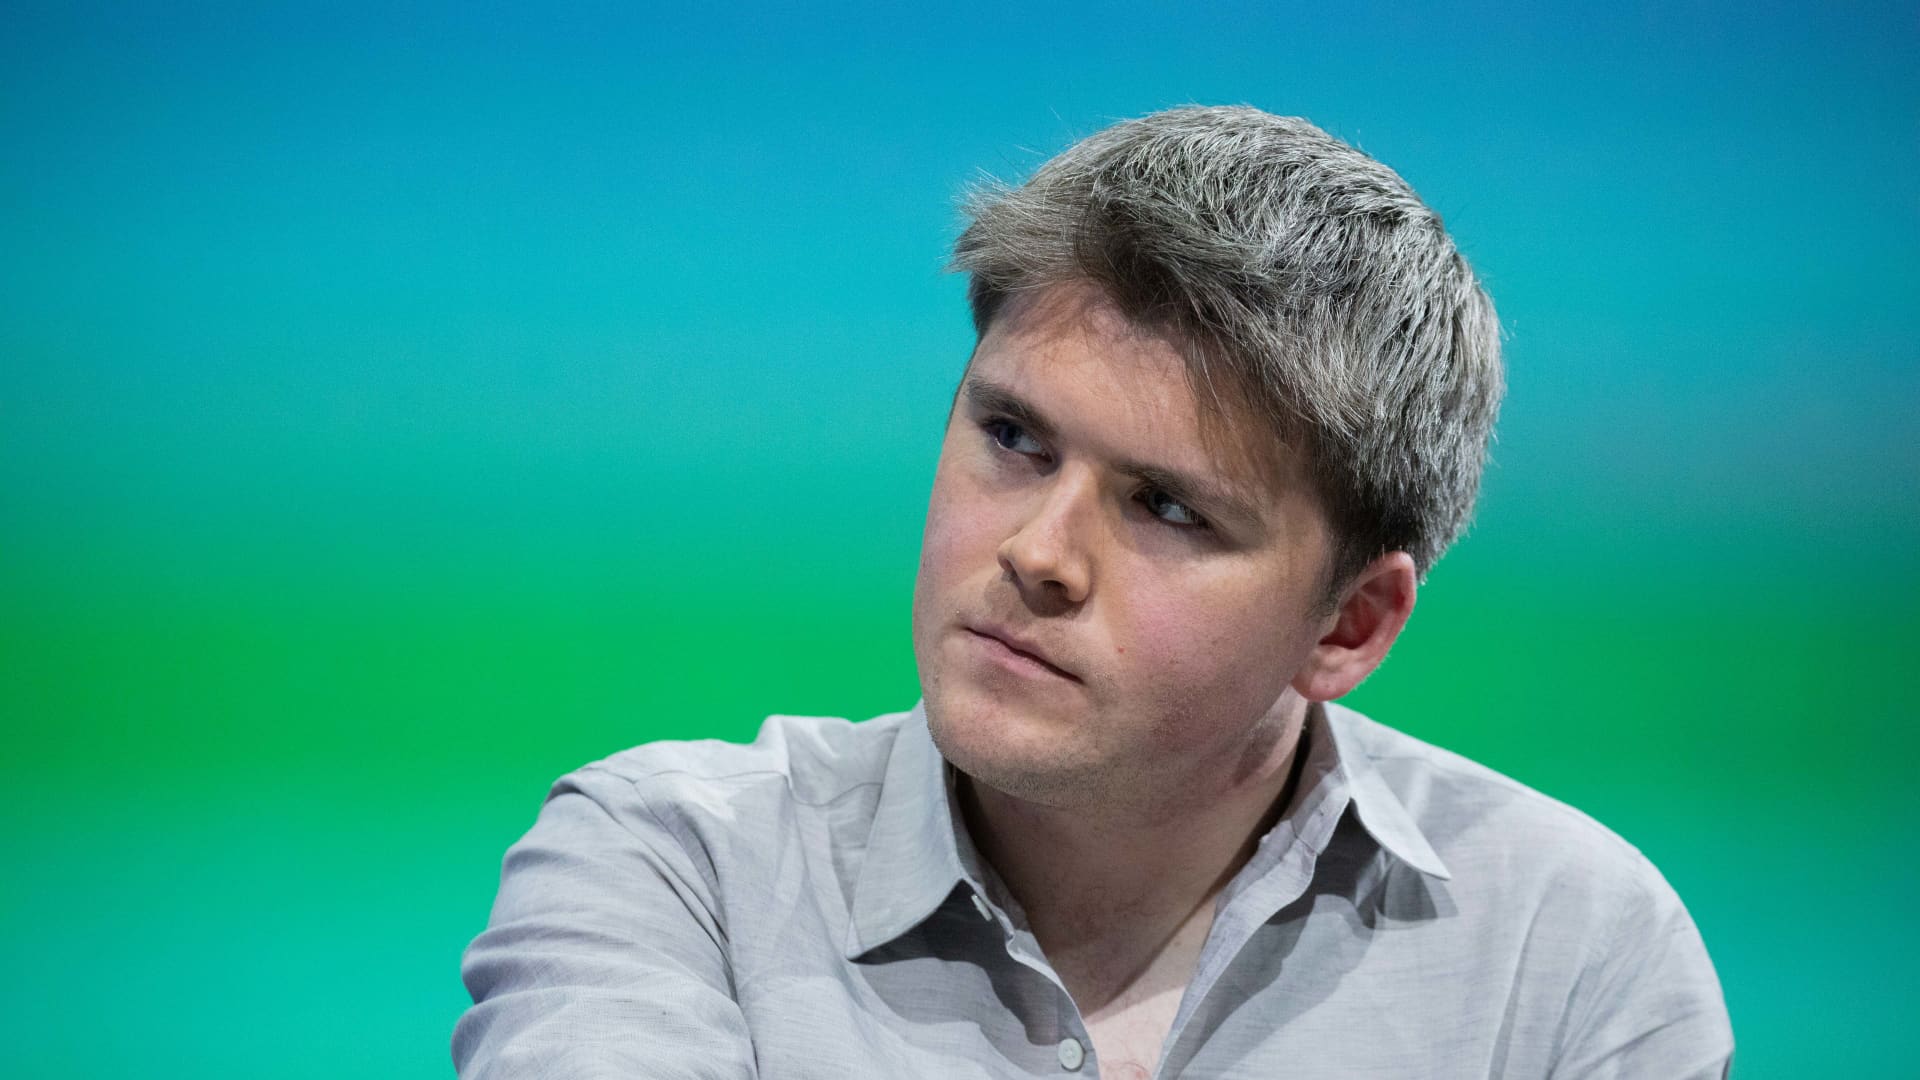 Stripe co-founder says high interest rates flushed out Silicon Valley’s ‘wackiest’ ideas